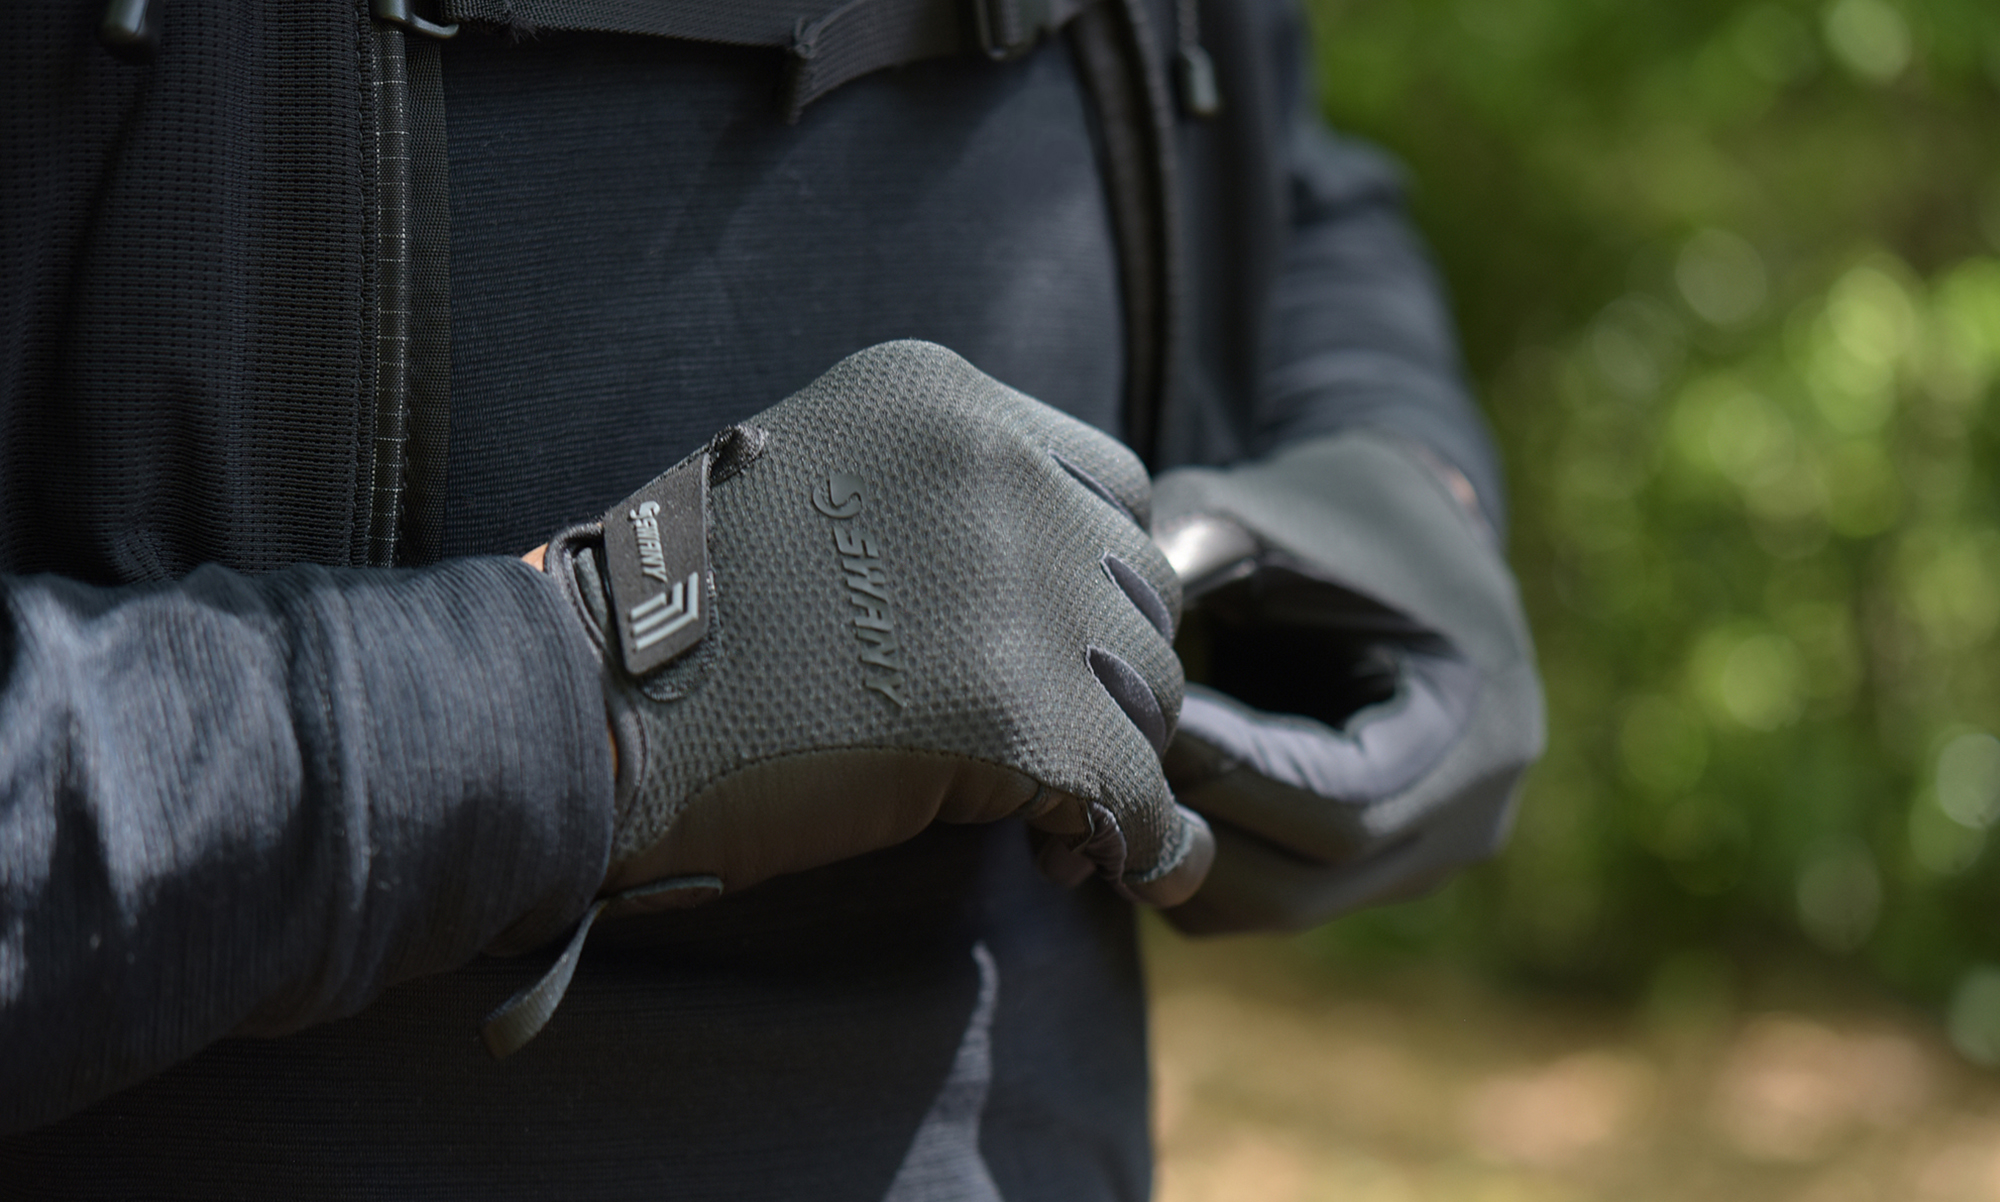 TR-705 Trail Leather Glove